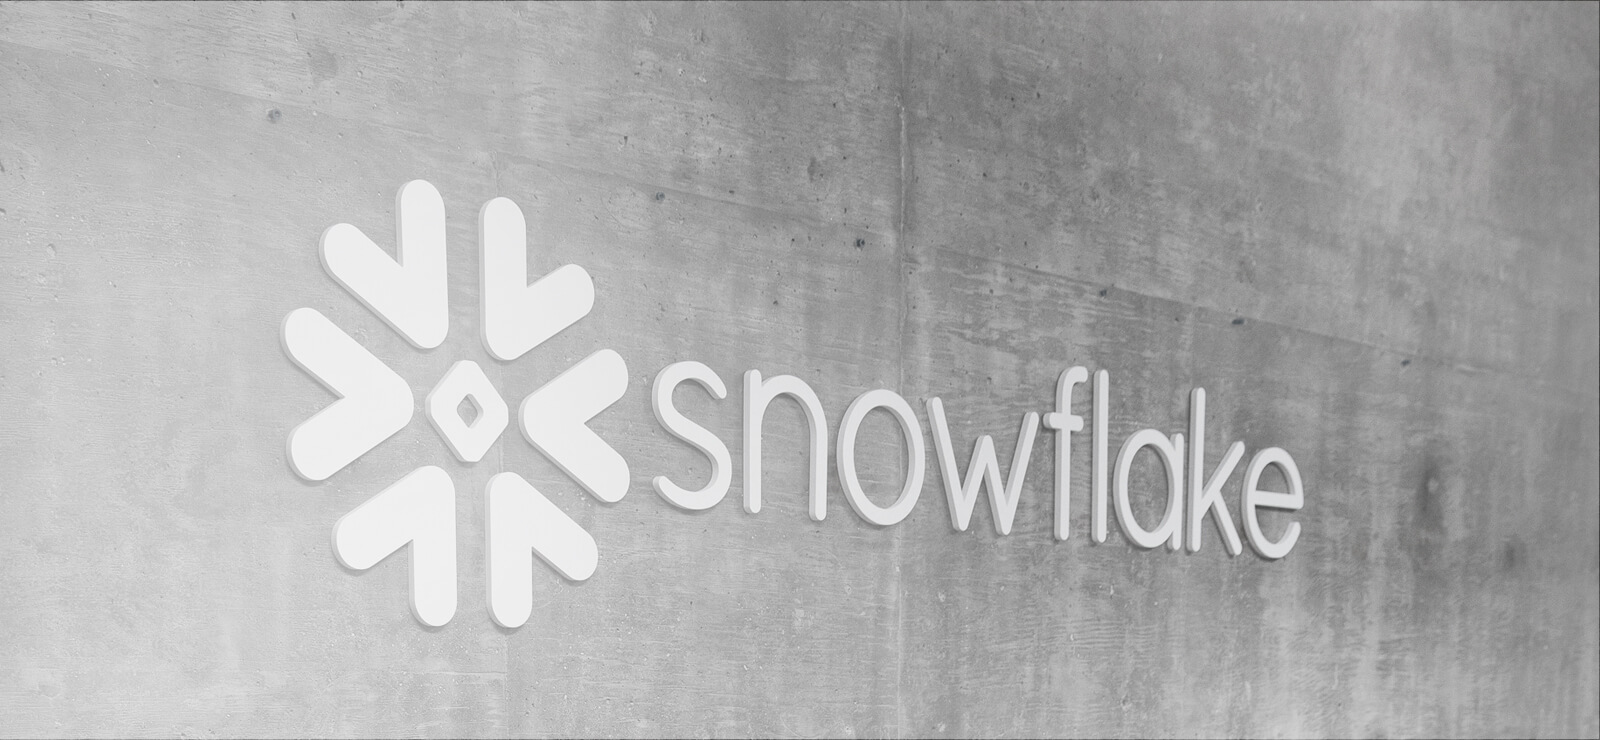 Snowflake Recognized as a Leader by Gartner: Third Consecutive Year Positioned in the Magic Quadrant Report